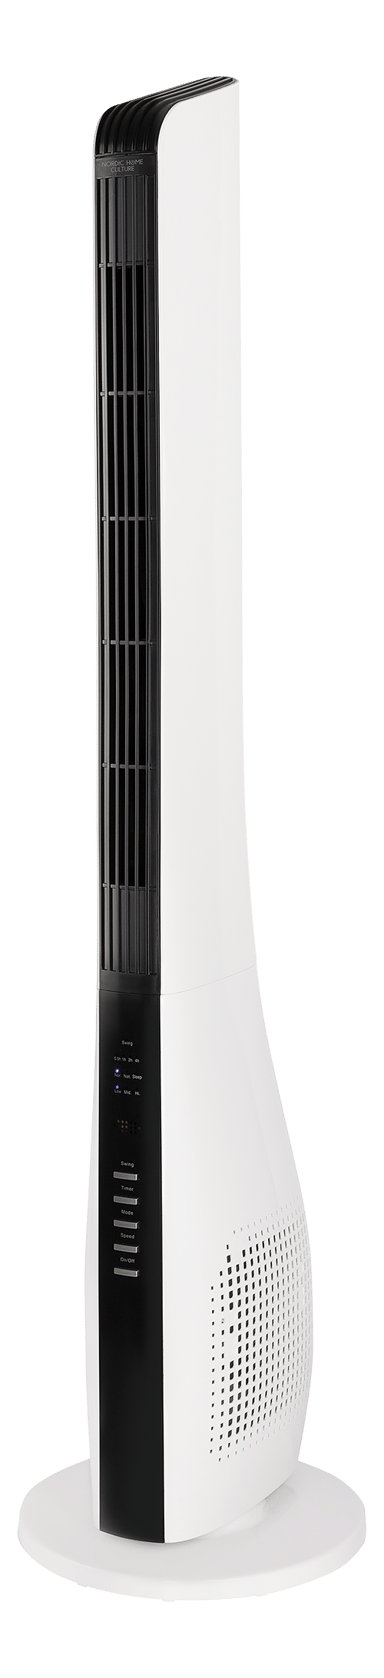 Nordic Home 2-I-1 Tower Fan 3 Speed 